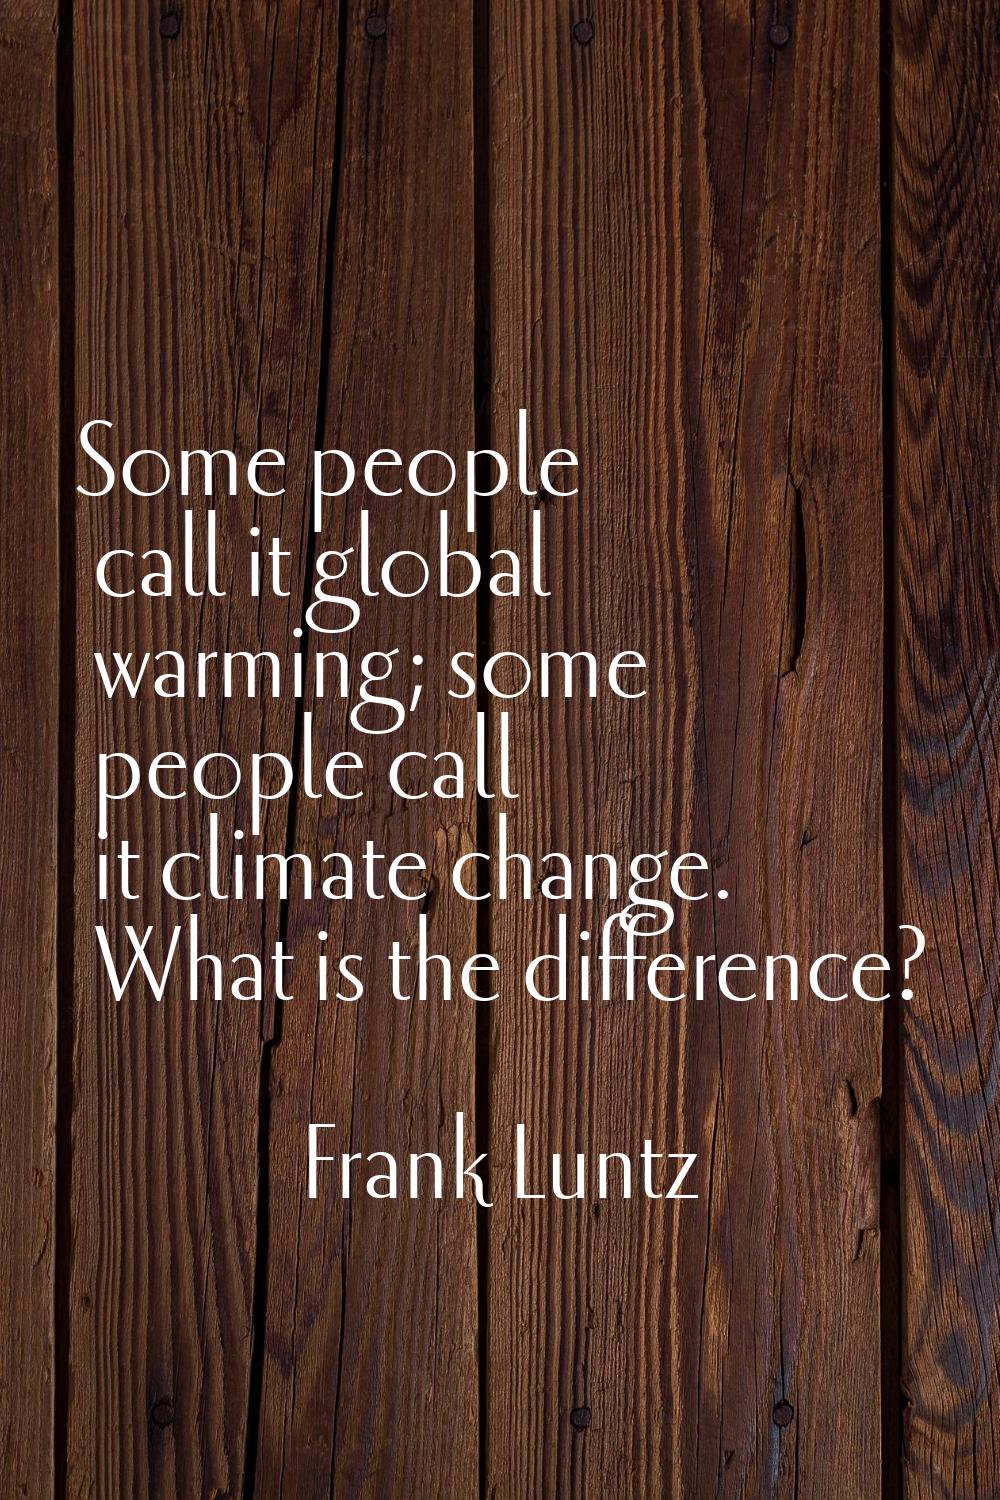 Some people call it global warming; some people call it climate change. What is the difference?